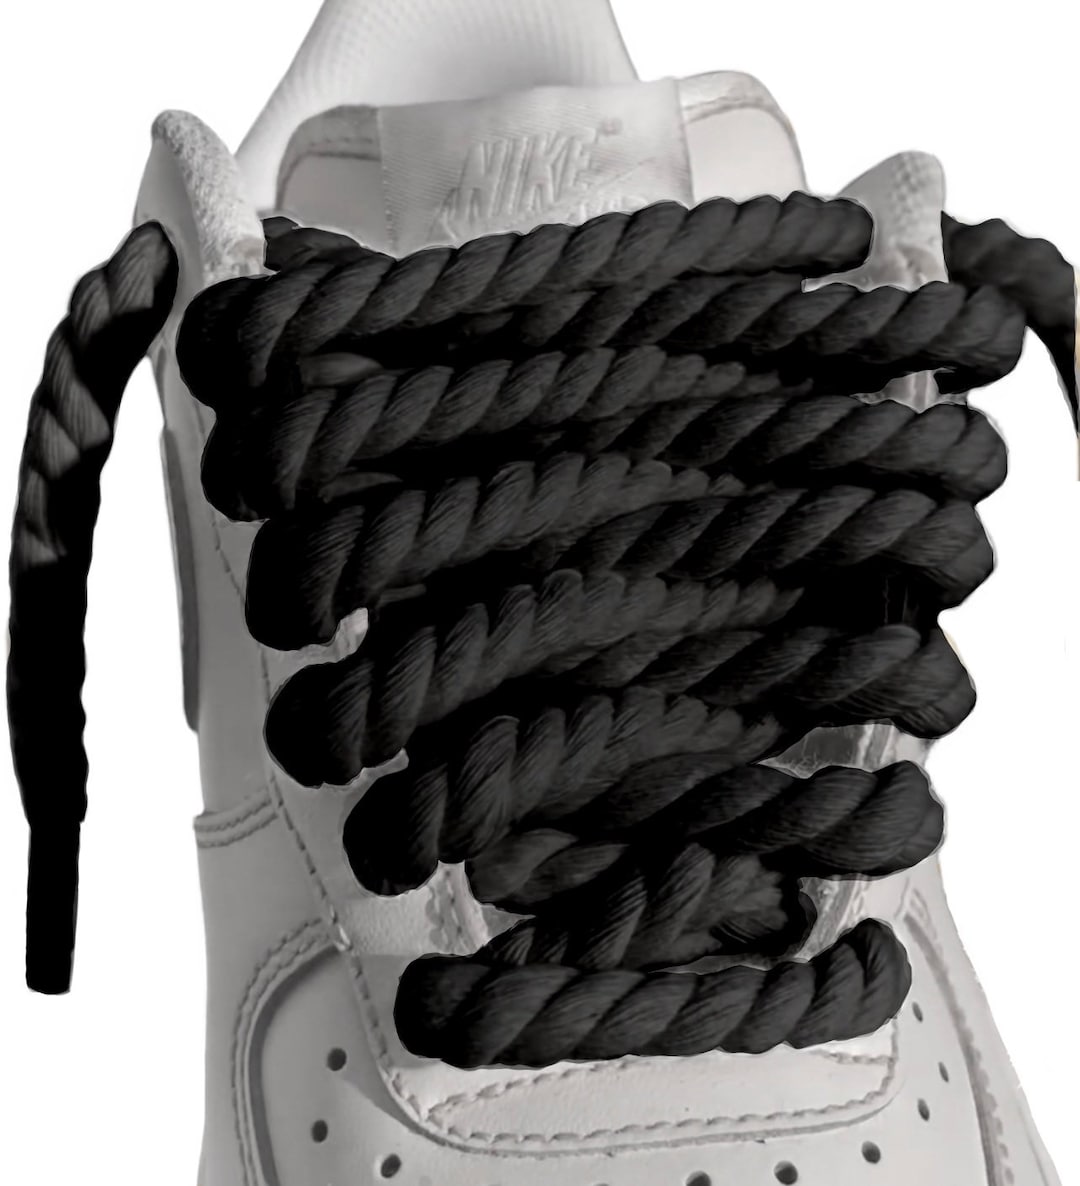 Black rope laces - AF1 White – Chunky Force